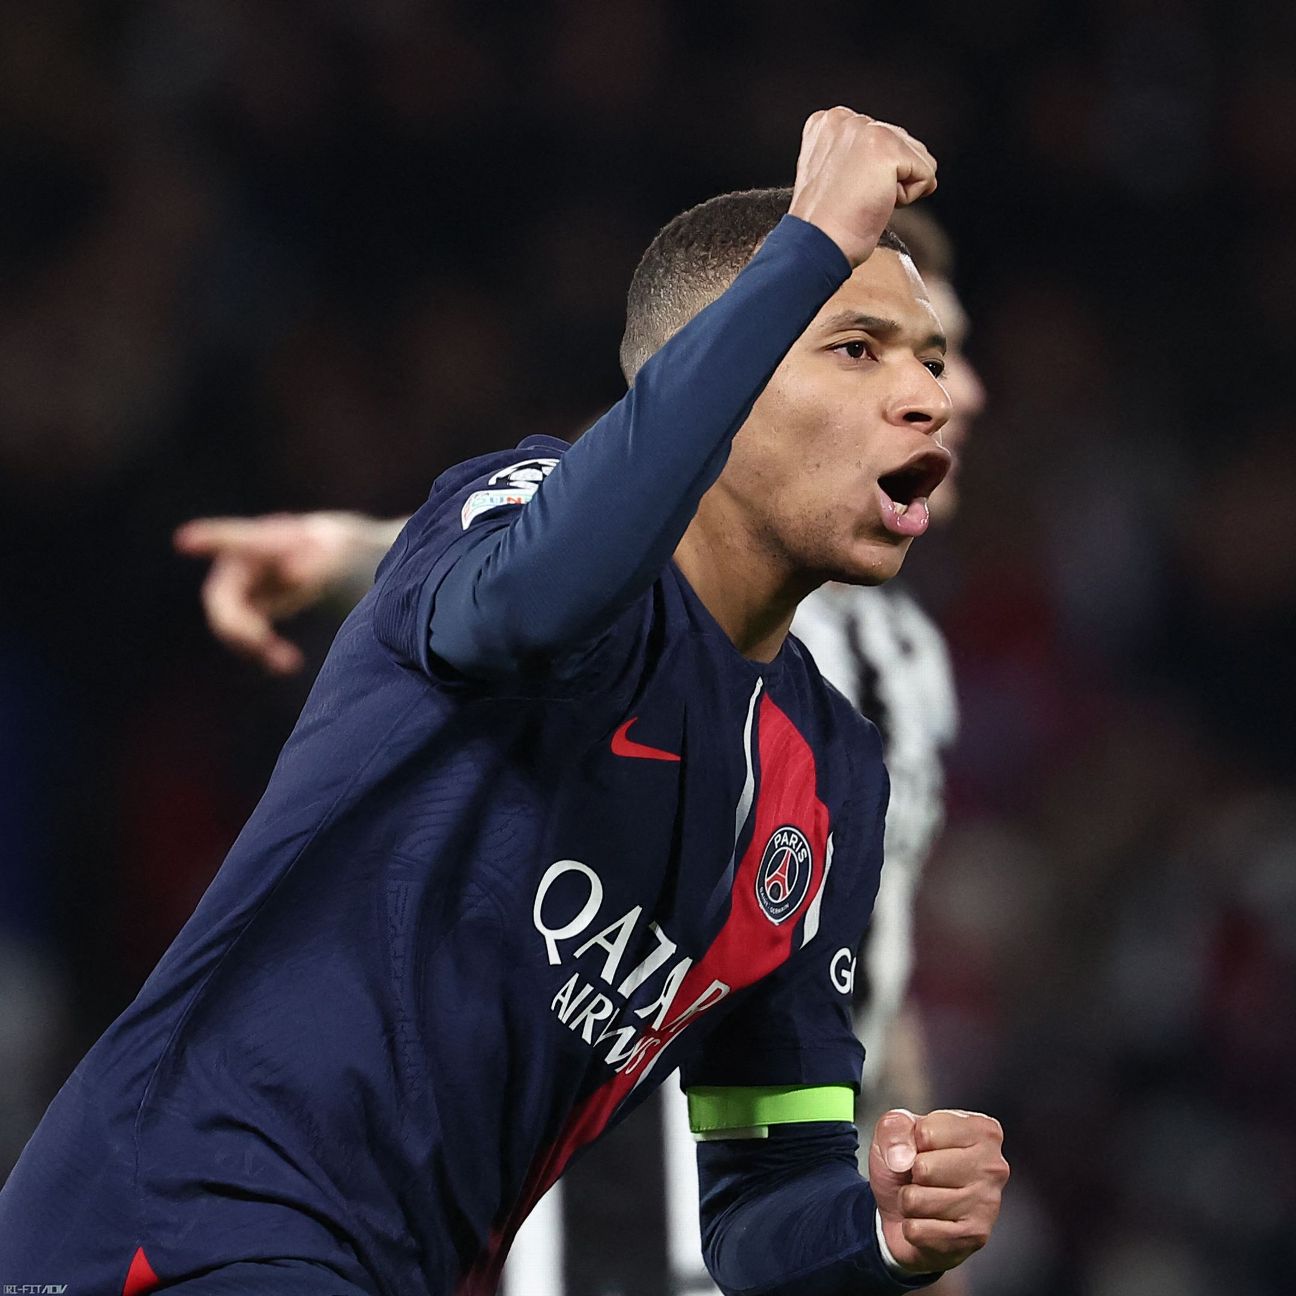 VAR official removed from Champions League game after Mbappé's late penalty  for PSG vs. Newcastle